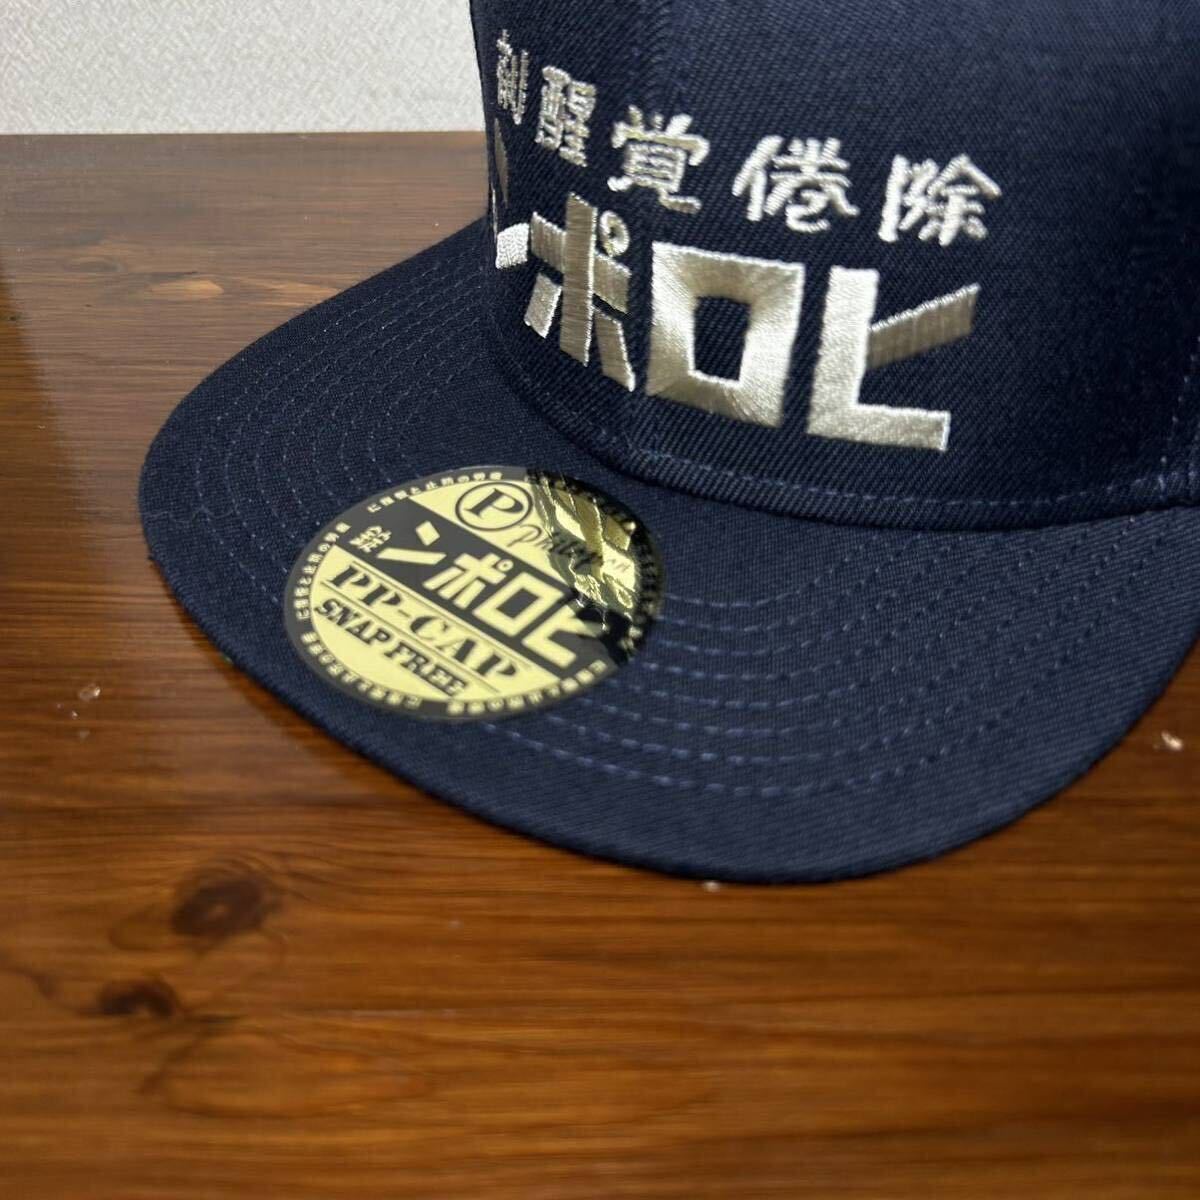 hiropon embroidery cap navy .. reverse side green 